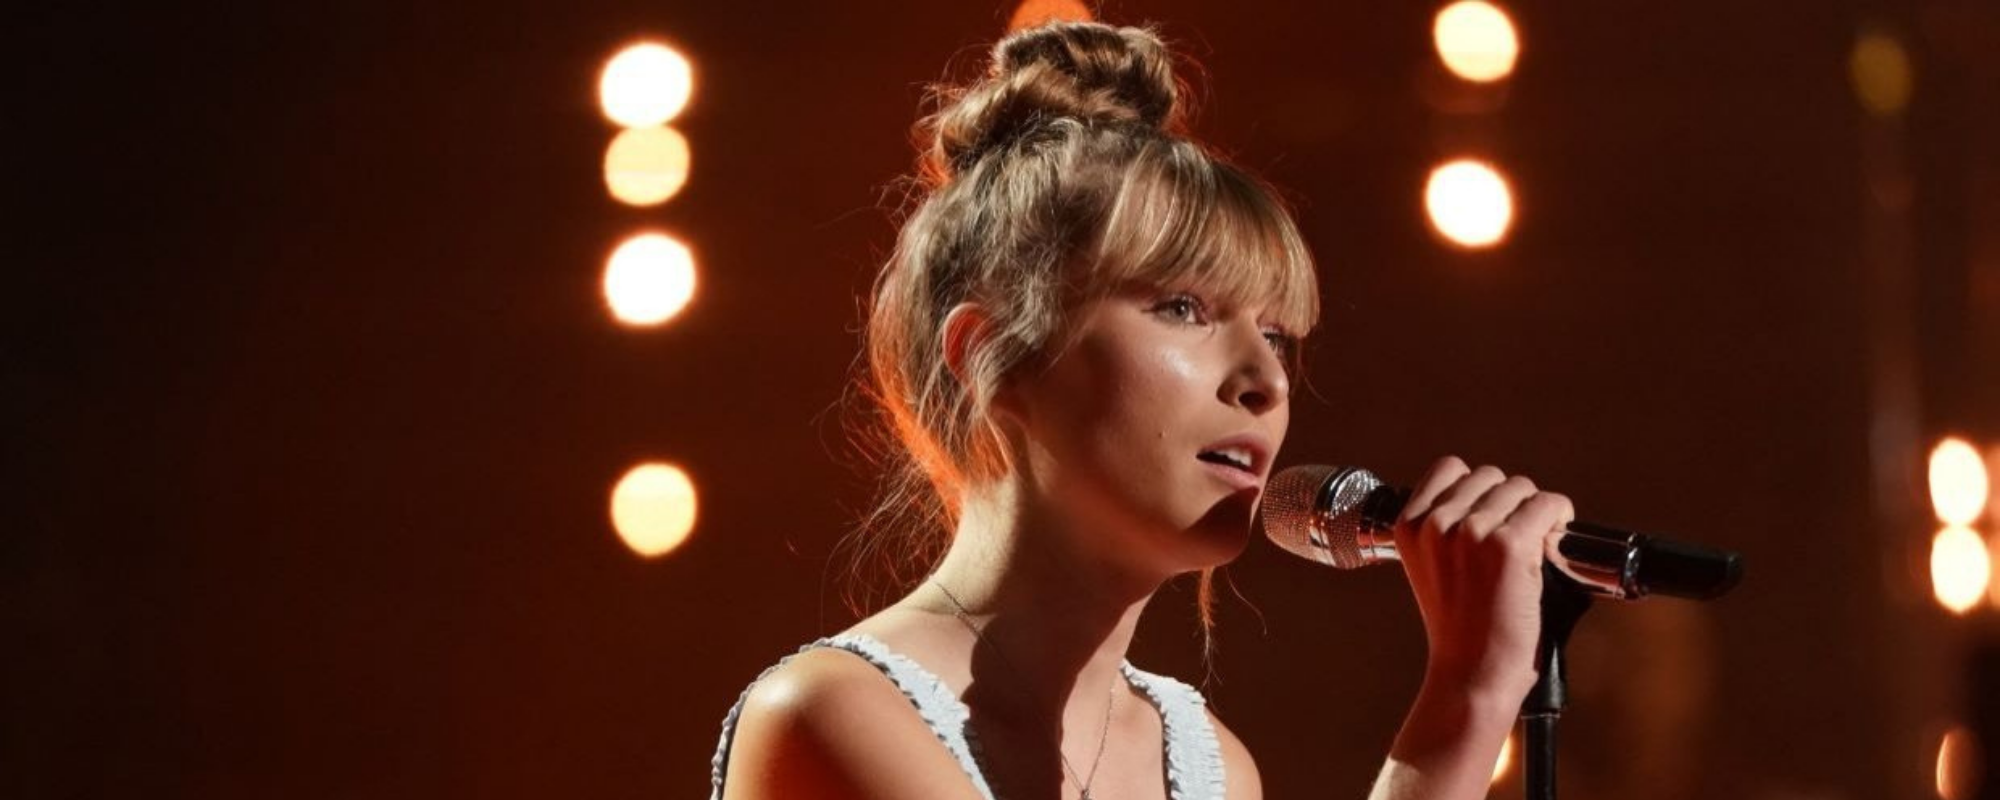 15-Year-Old Ava August Proves “Old Soul” Talent, Teams with Josh Groban for Joni Mitchell Cover on ‘American Idol‘